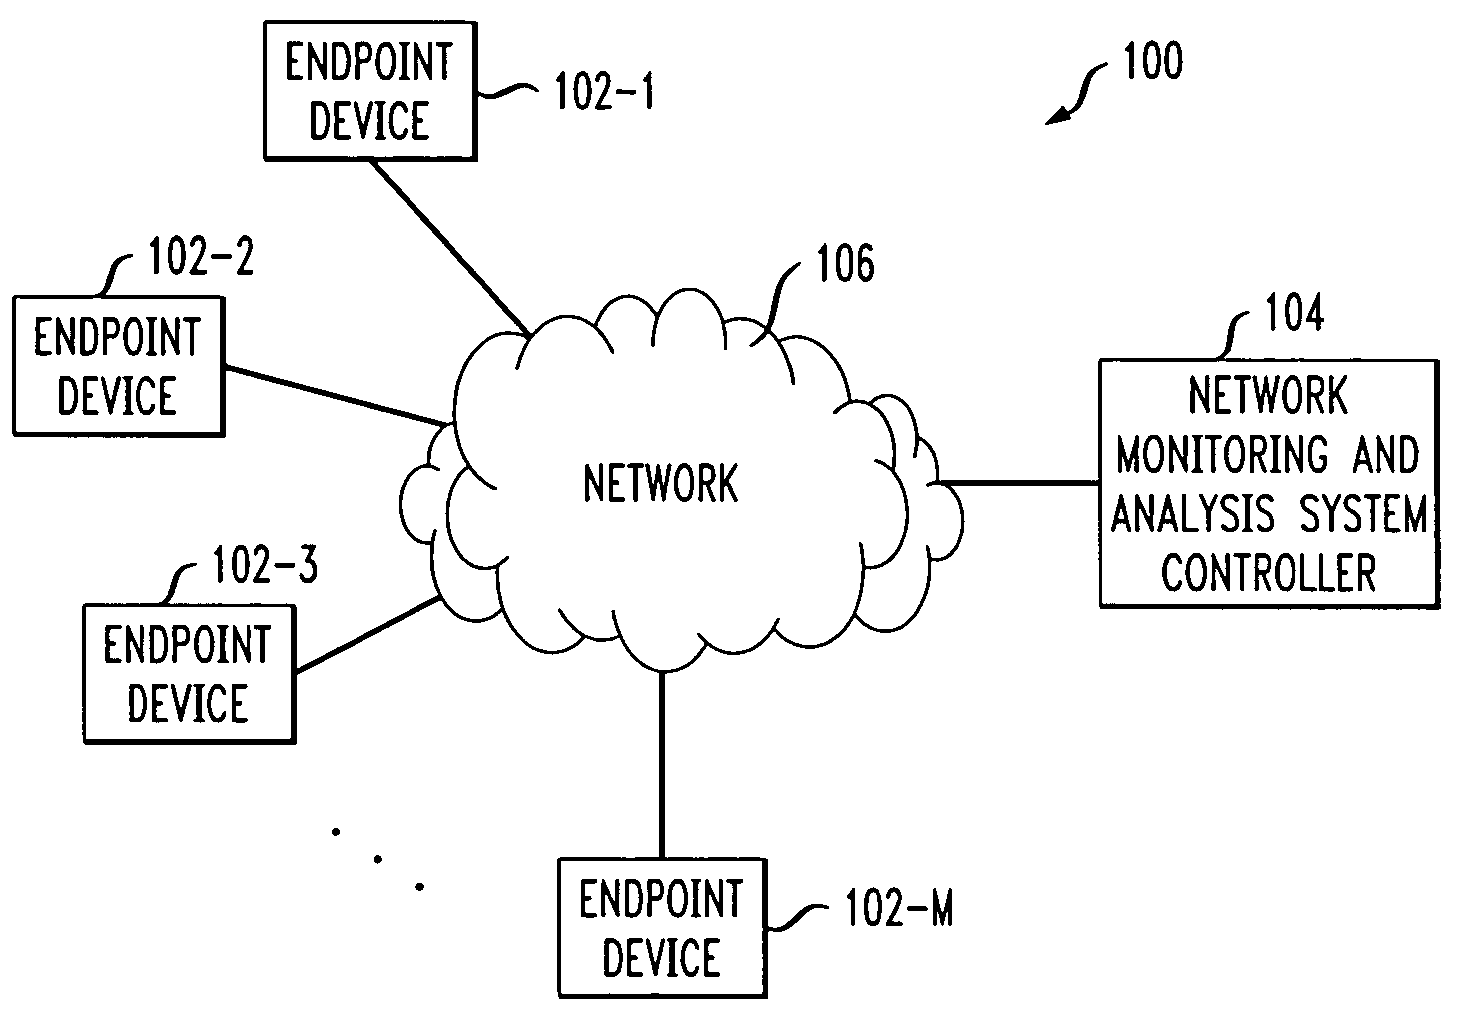 Determination of endpoint device location for efficient analysis of network performance